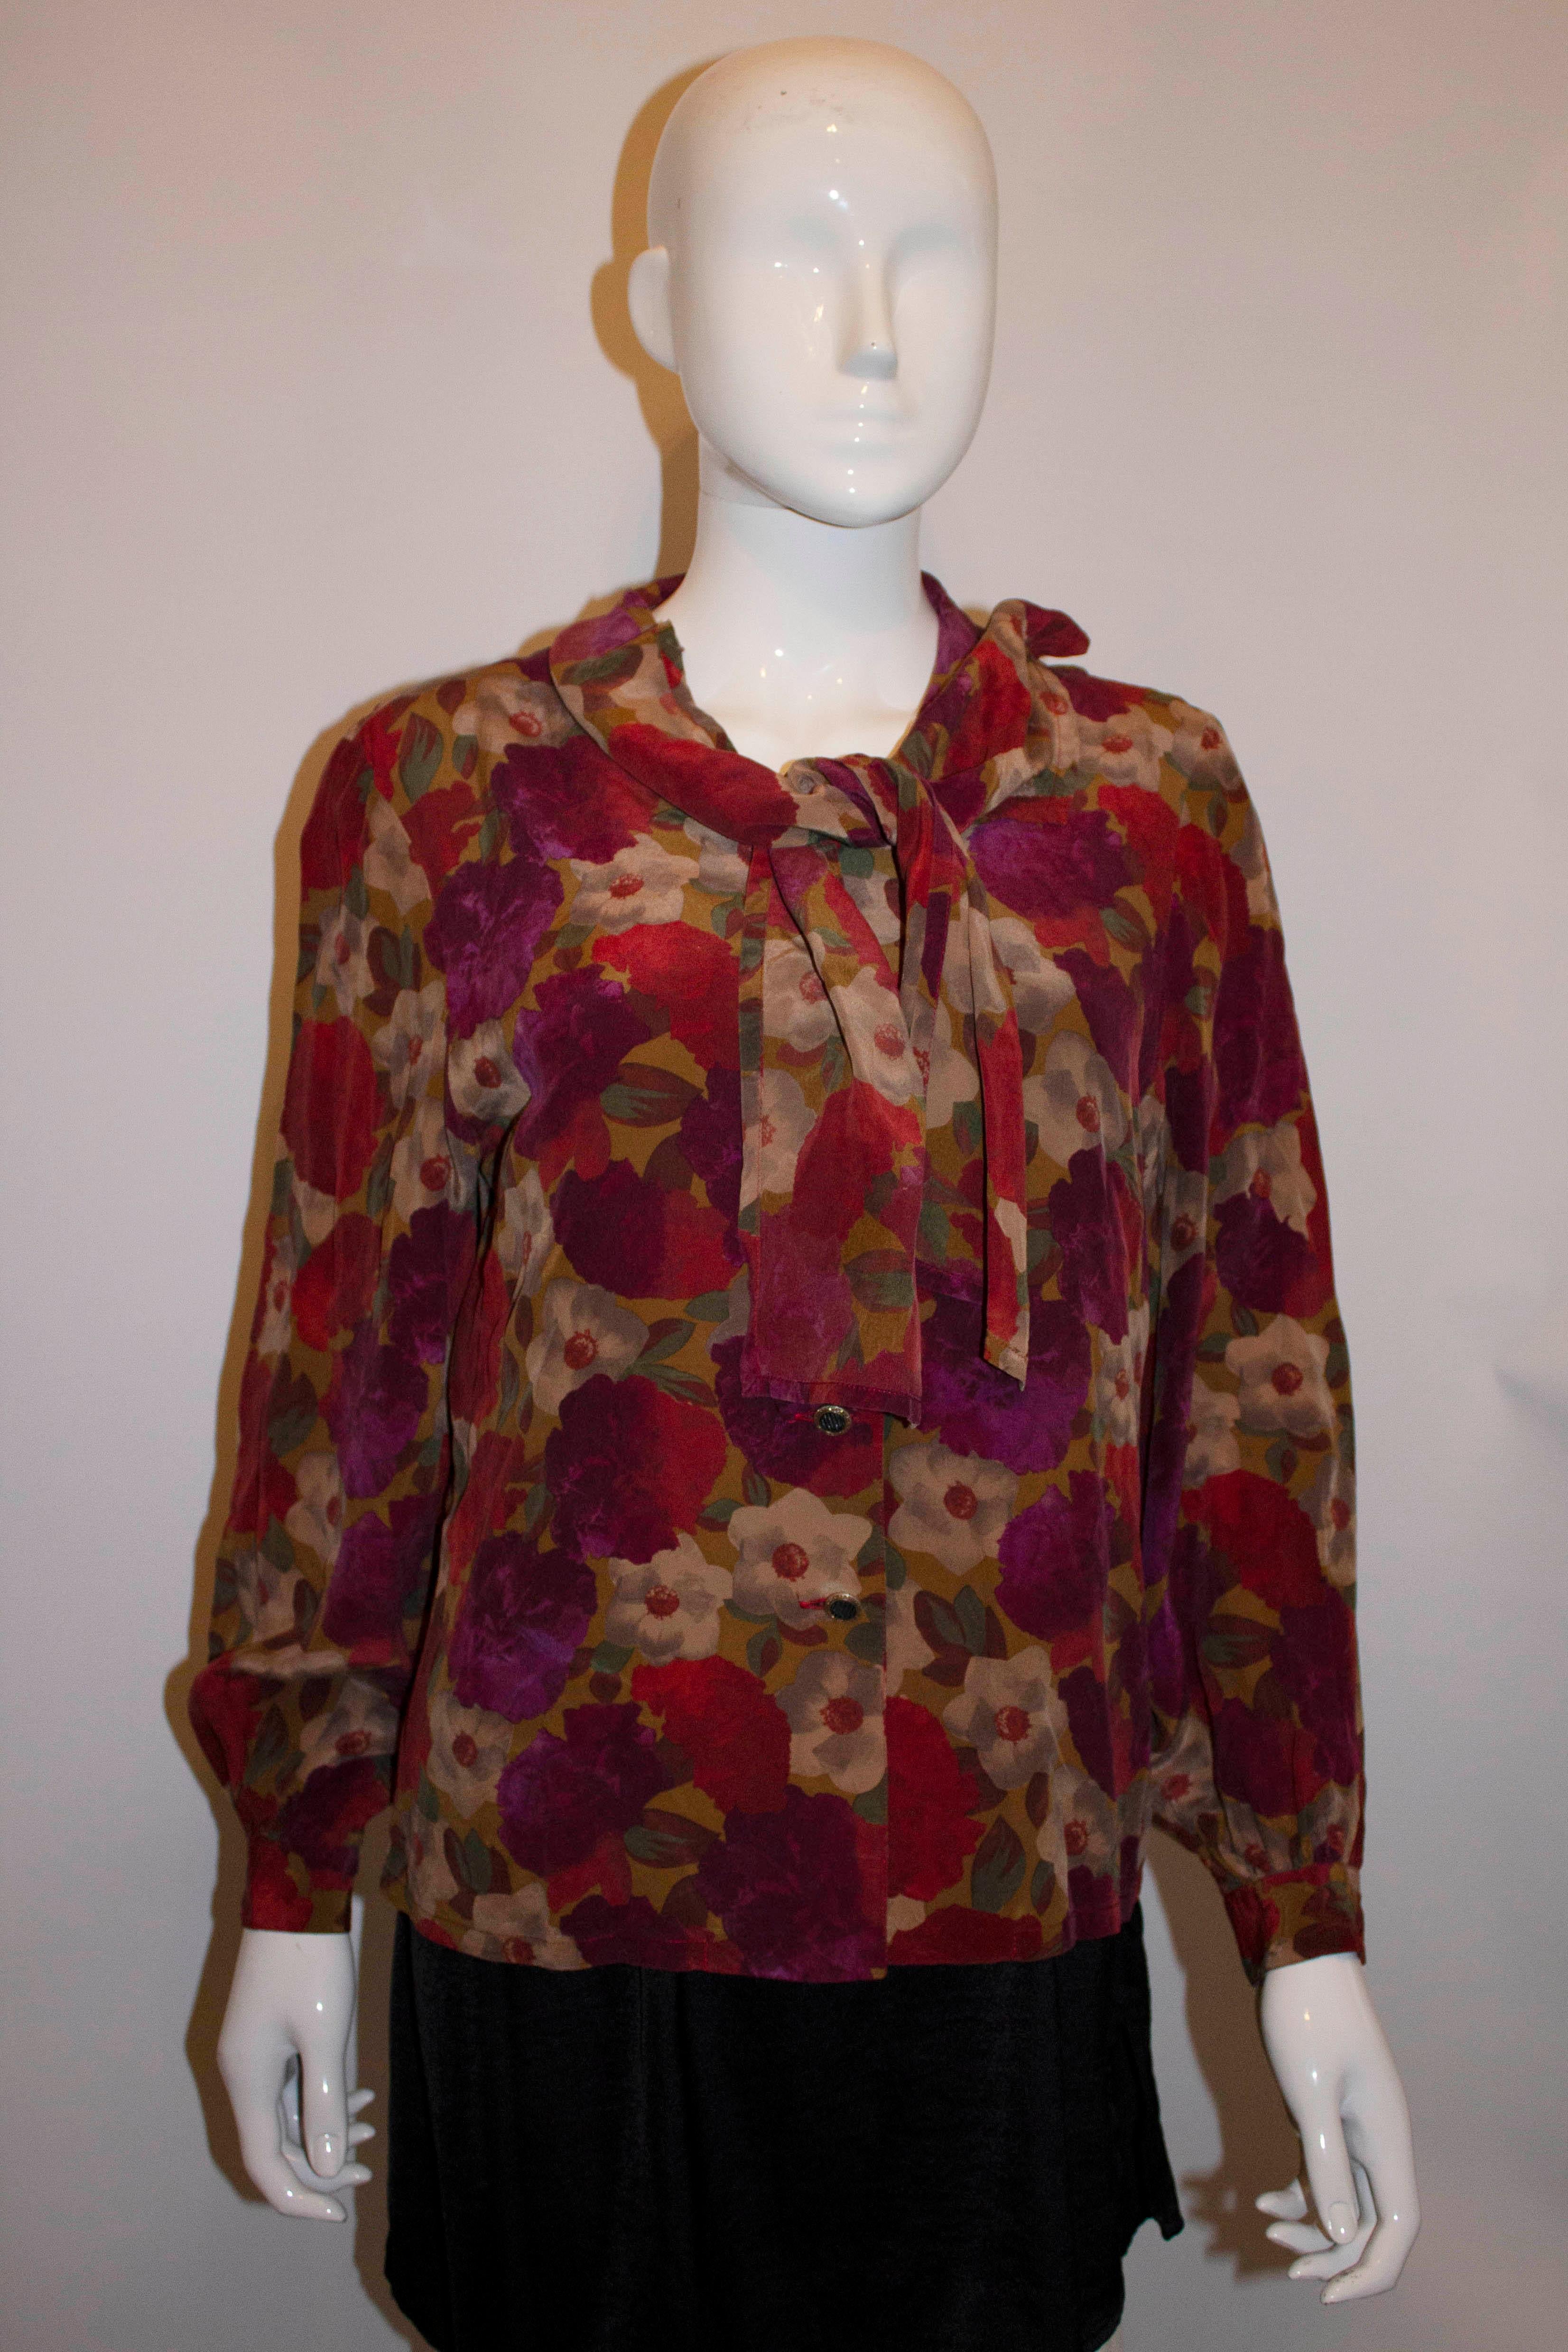 Gres Paris Floral Silk Blouse In Good Condition For Sale In London, GB